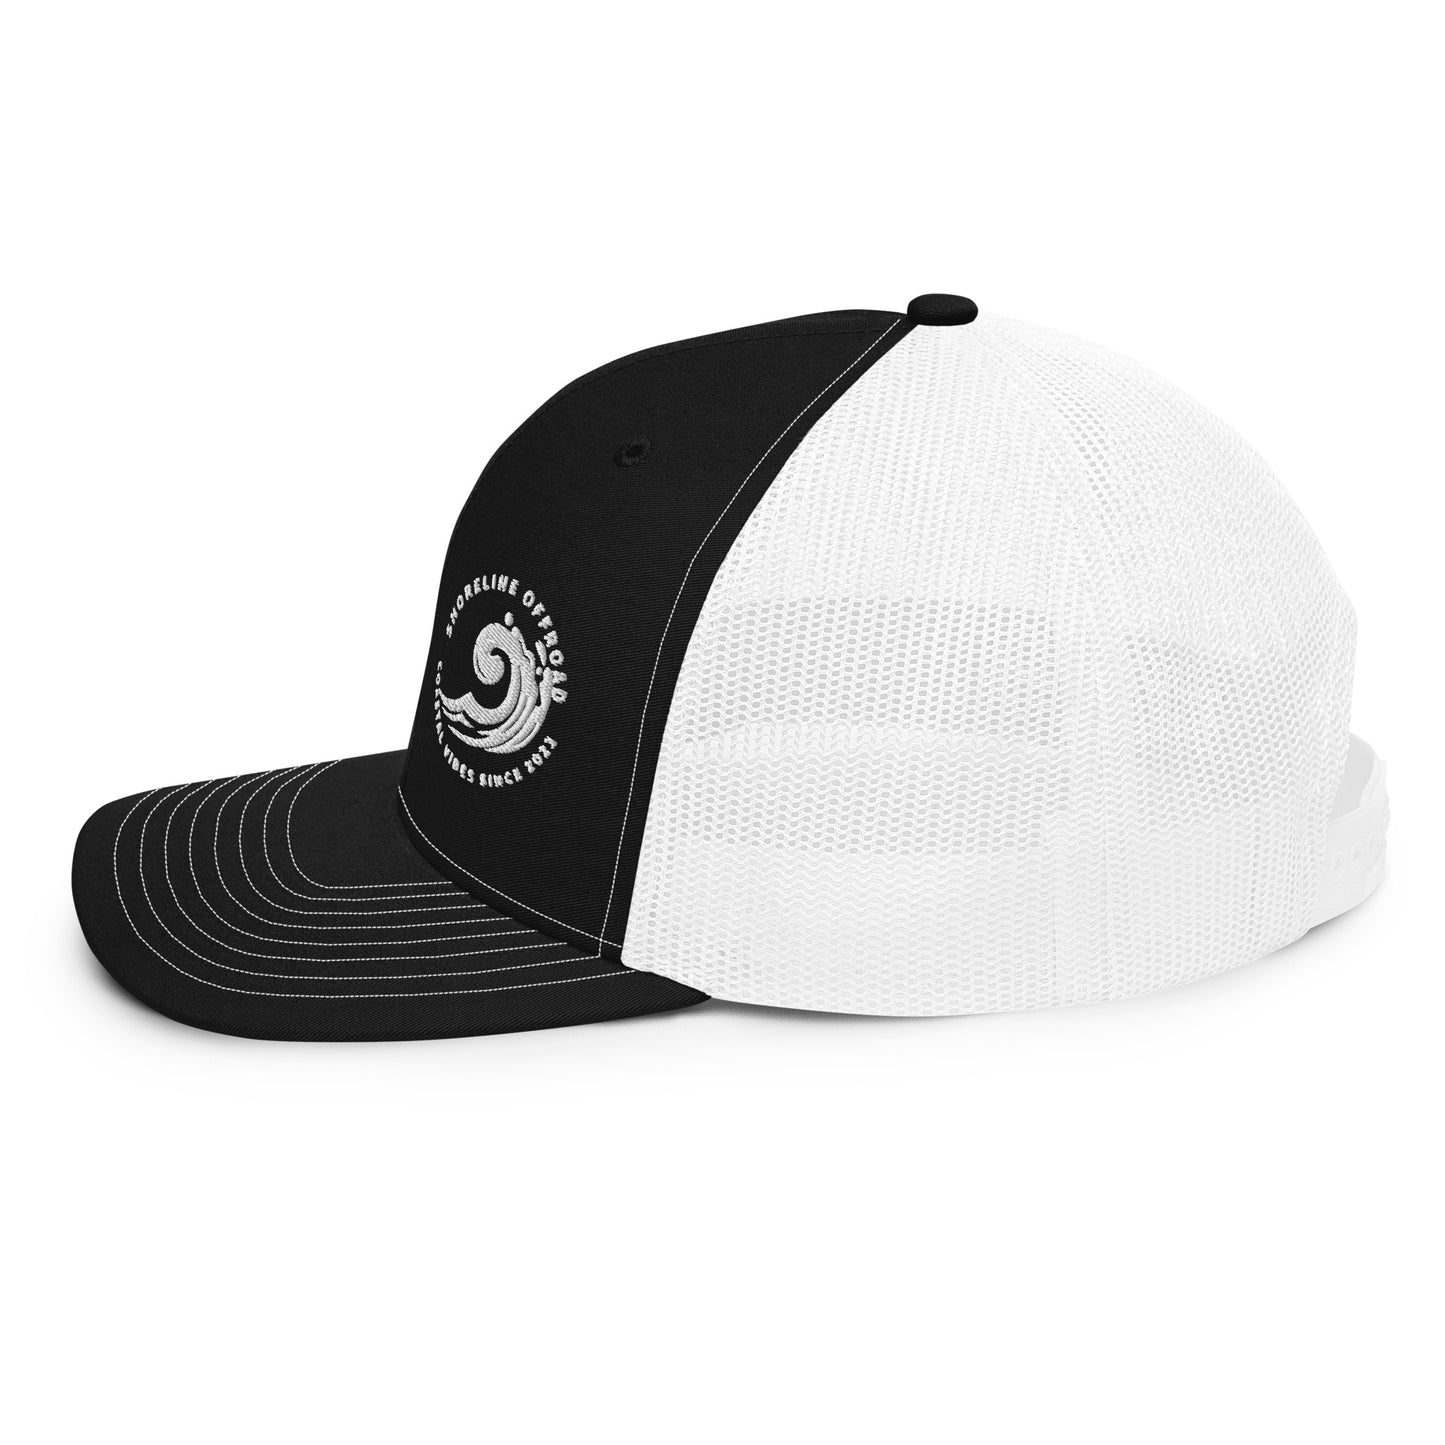 a black and white trucker hat with a white bill